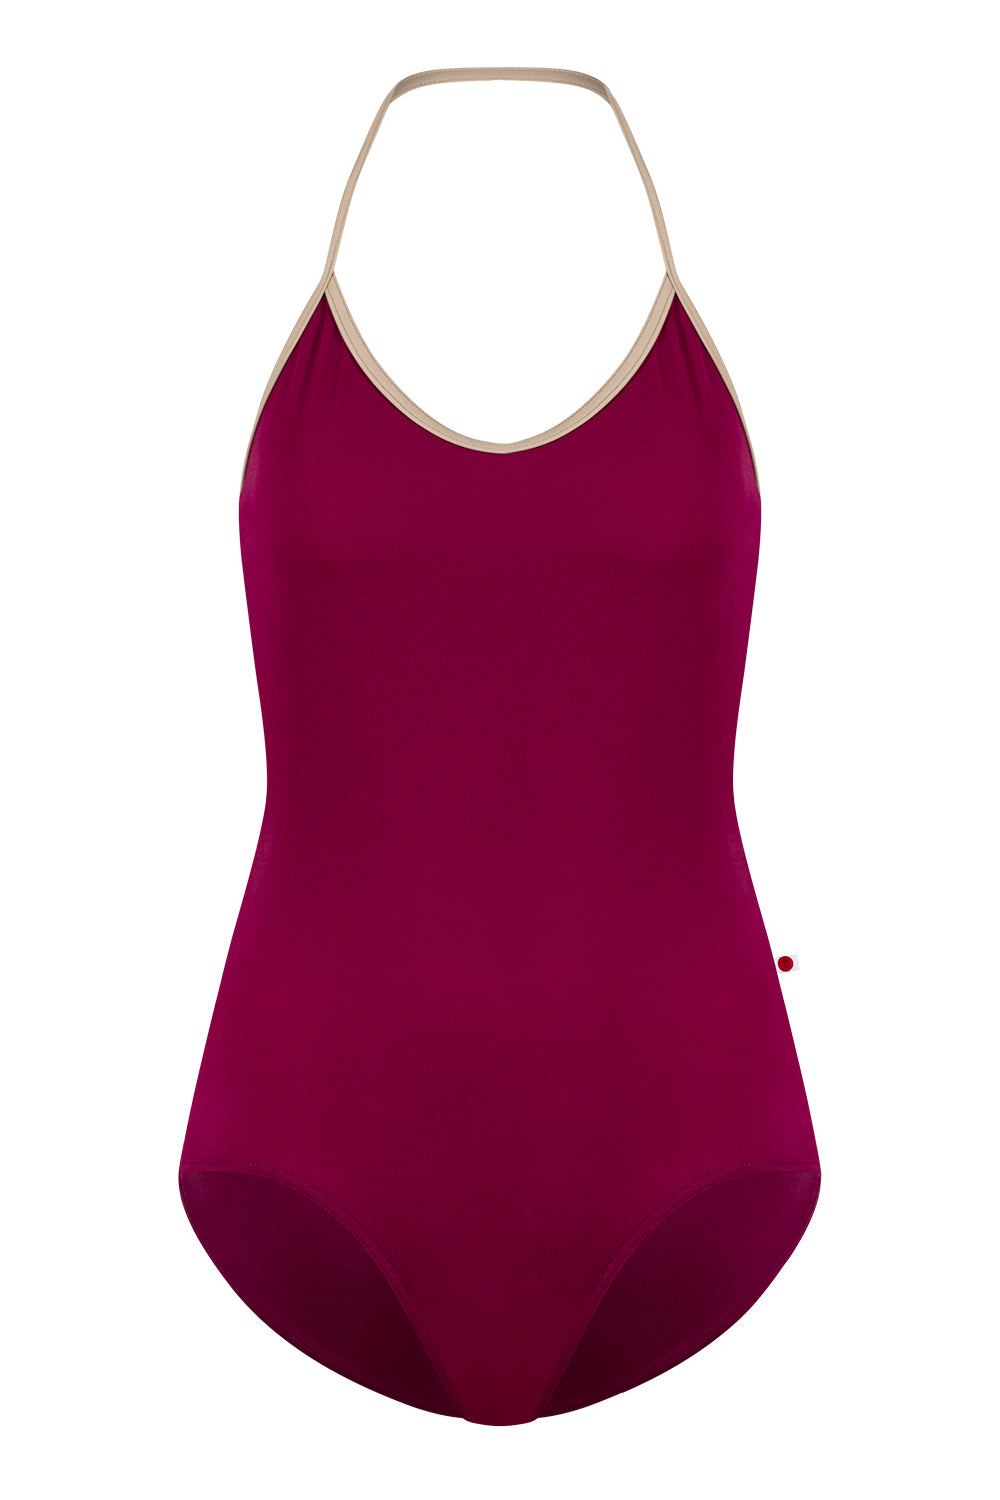 Kate leotard in T-Maroon body color with T-Mosaic trim color